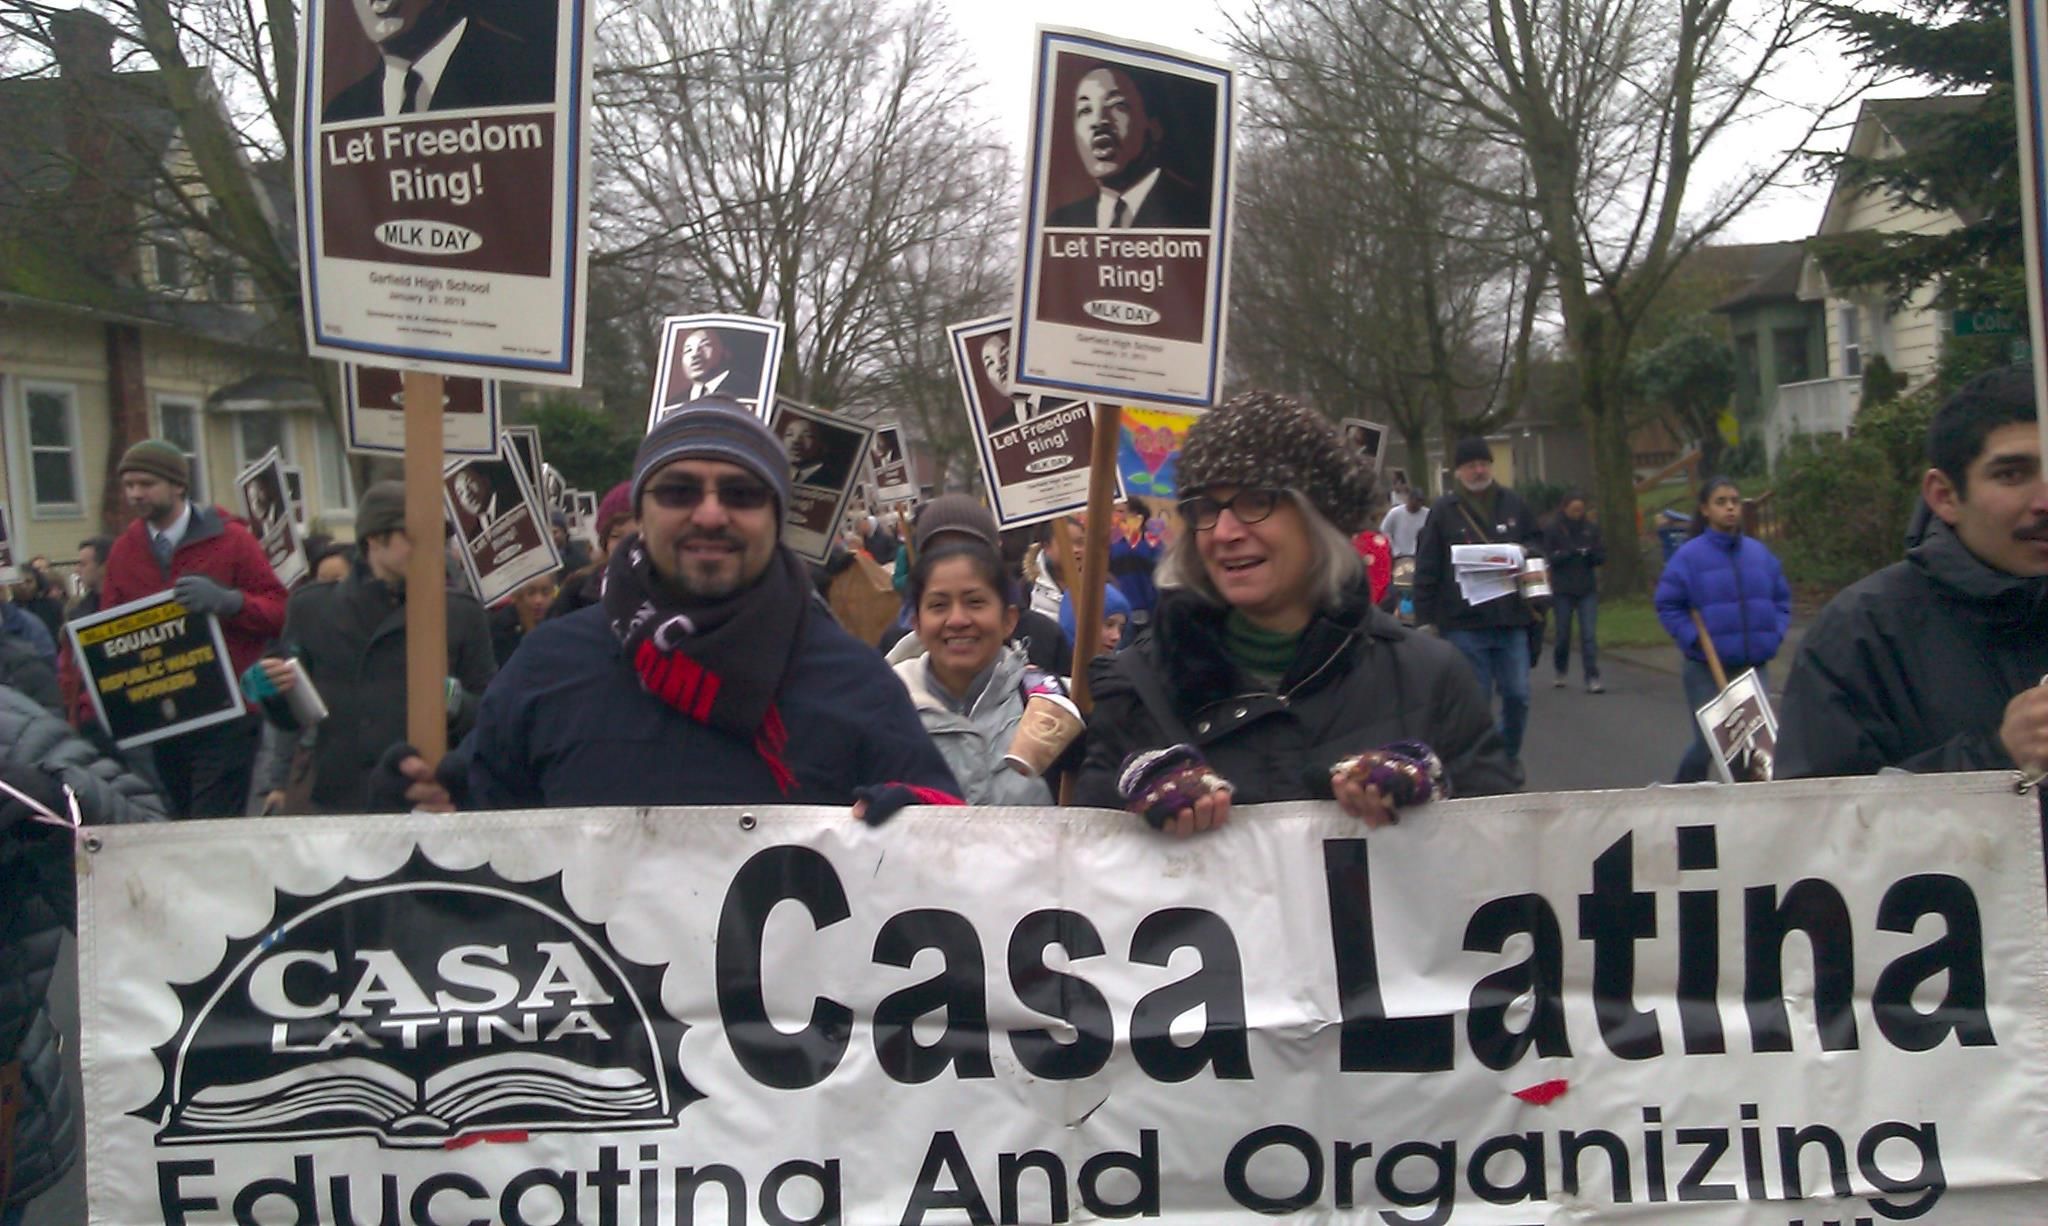 Martin Luther King March, January 2013, with Francisco "Paco" Diaz. (Photo courtesy Francisco Diaz)